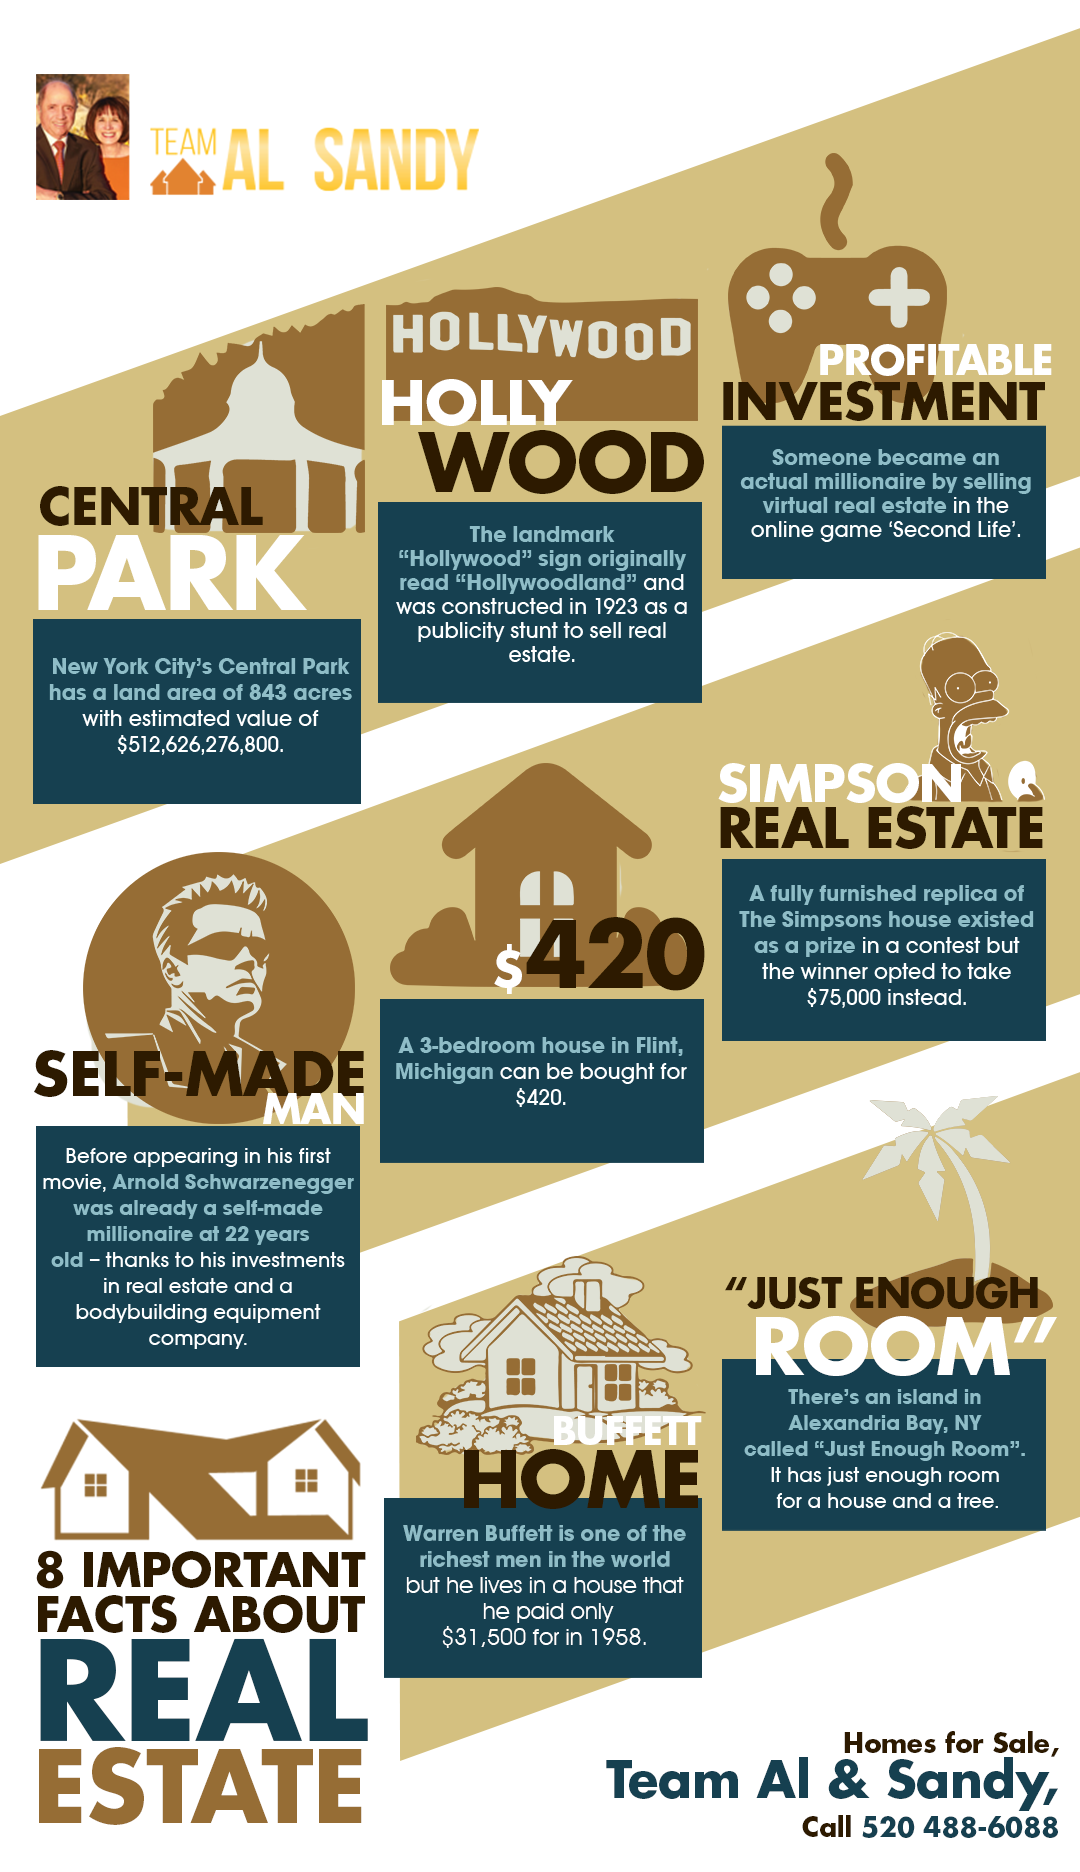 8 Interesting Facts About Real Estate Shared Info Graphics